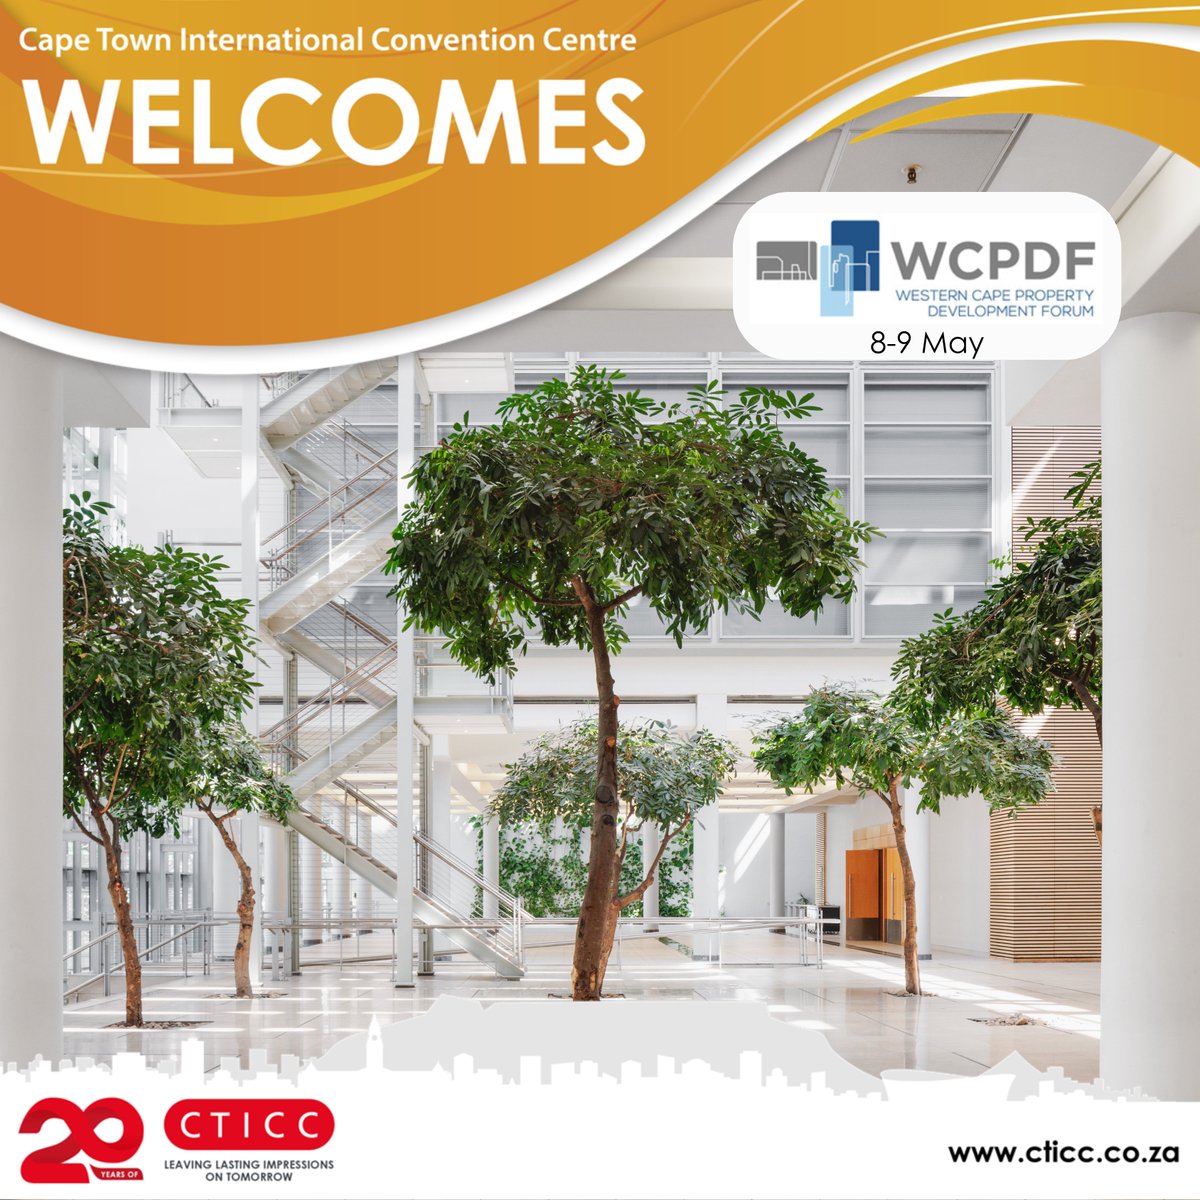 We welcome back the Western Cape Property Development Forum, addressing industry challenges.

#20YearsOfExcellence
#20YearsOfCTICC
#WCPDF2024